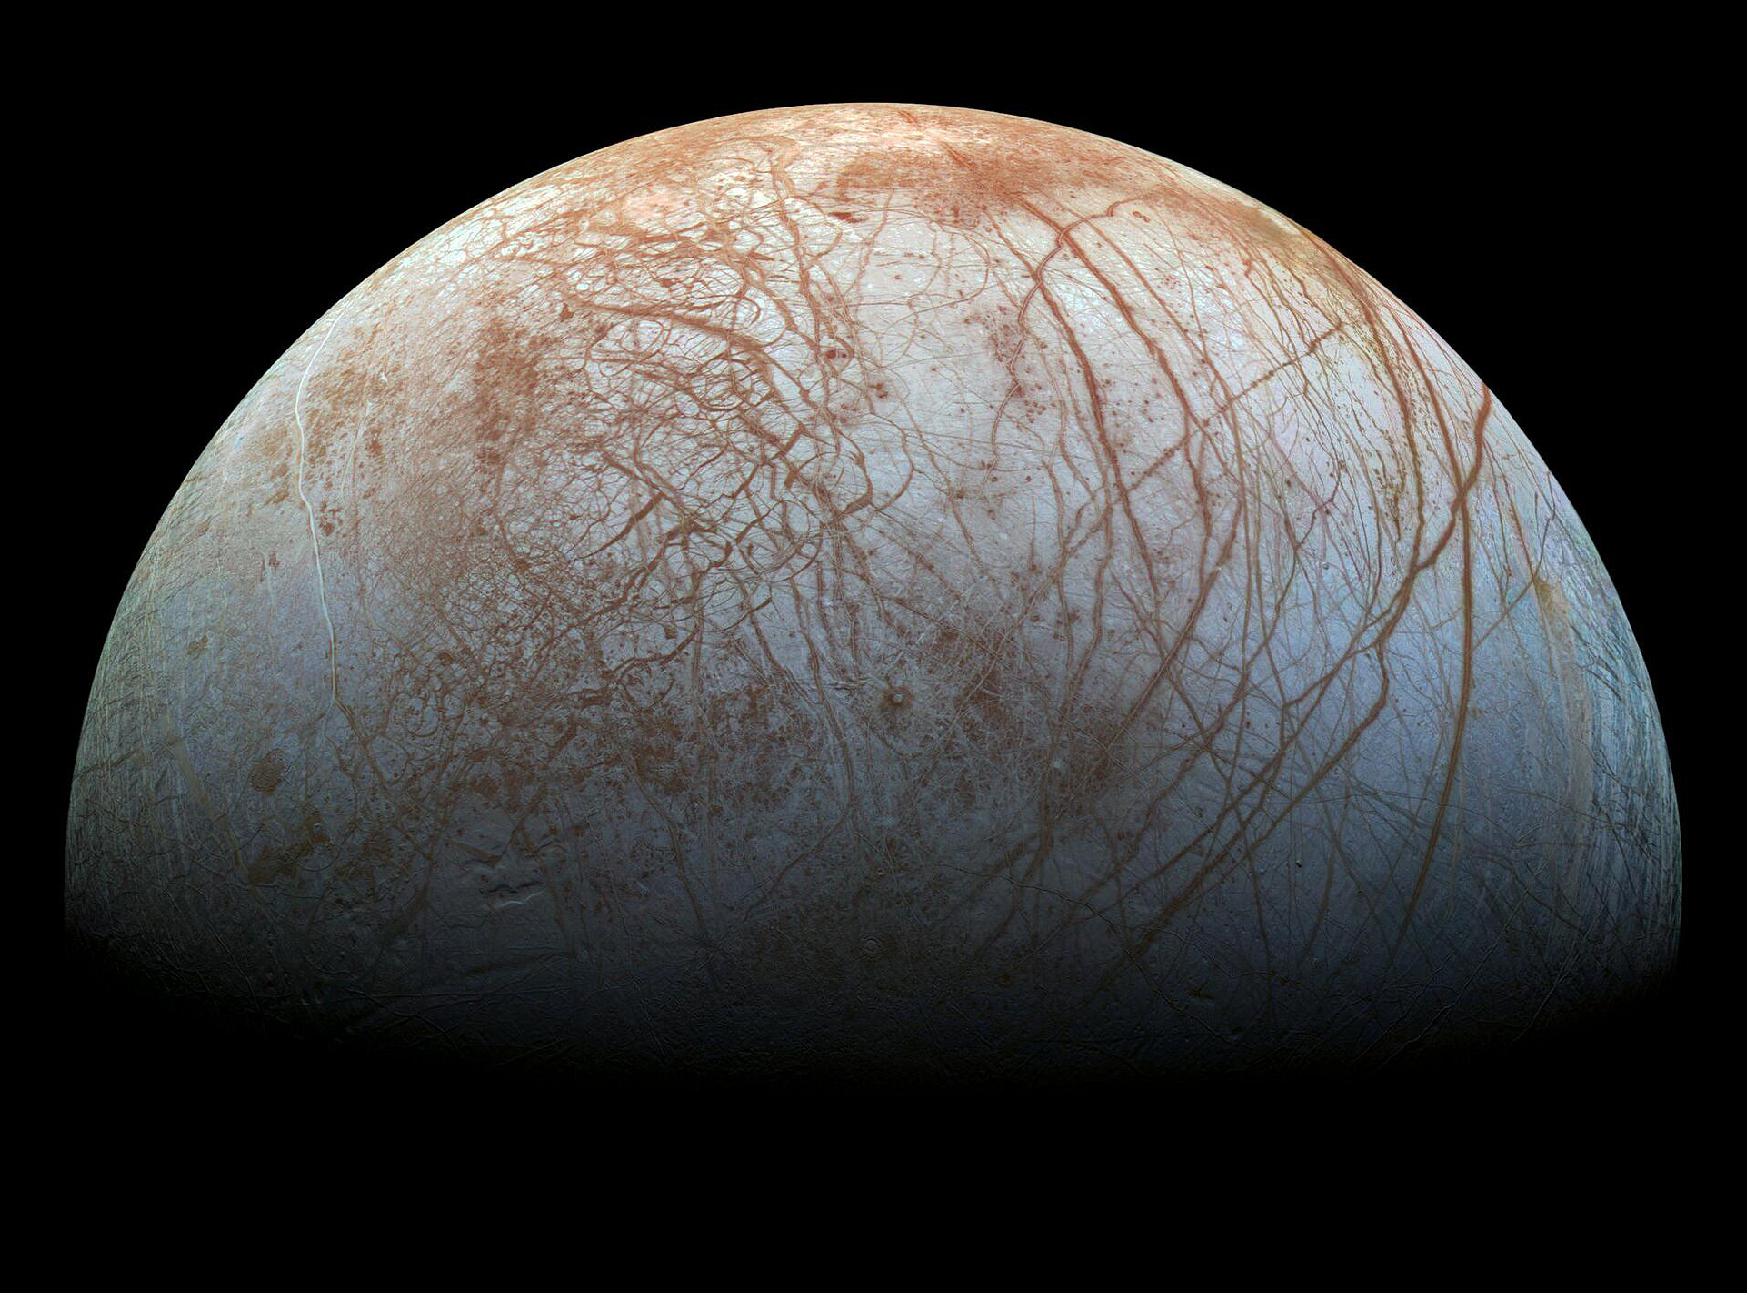 Figure 1: The scars seen in this view of the moon (Europa) from the archives of NASA's Galileo mission – based on images taken by the spacecraft in the 1990s – are a series of long cracks in its icy surface, thought to arise as Jupiter tugs at Europa and breaks the ice apart. The colors visible across the moon's surface are representative of the surface composition and size of the ice grains: reddish-brown areas, for instance, contain high proportions of non-ice substances, while blue-white areas are relatively pure (image credit: NASA/JPL-Caltech/SETI Institute)